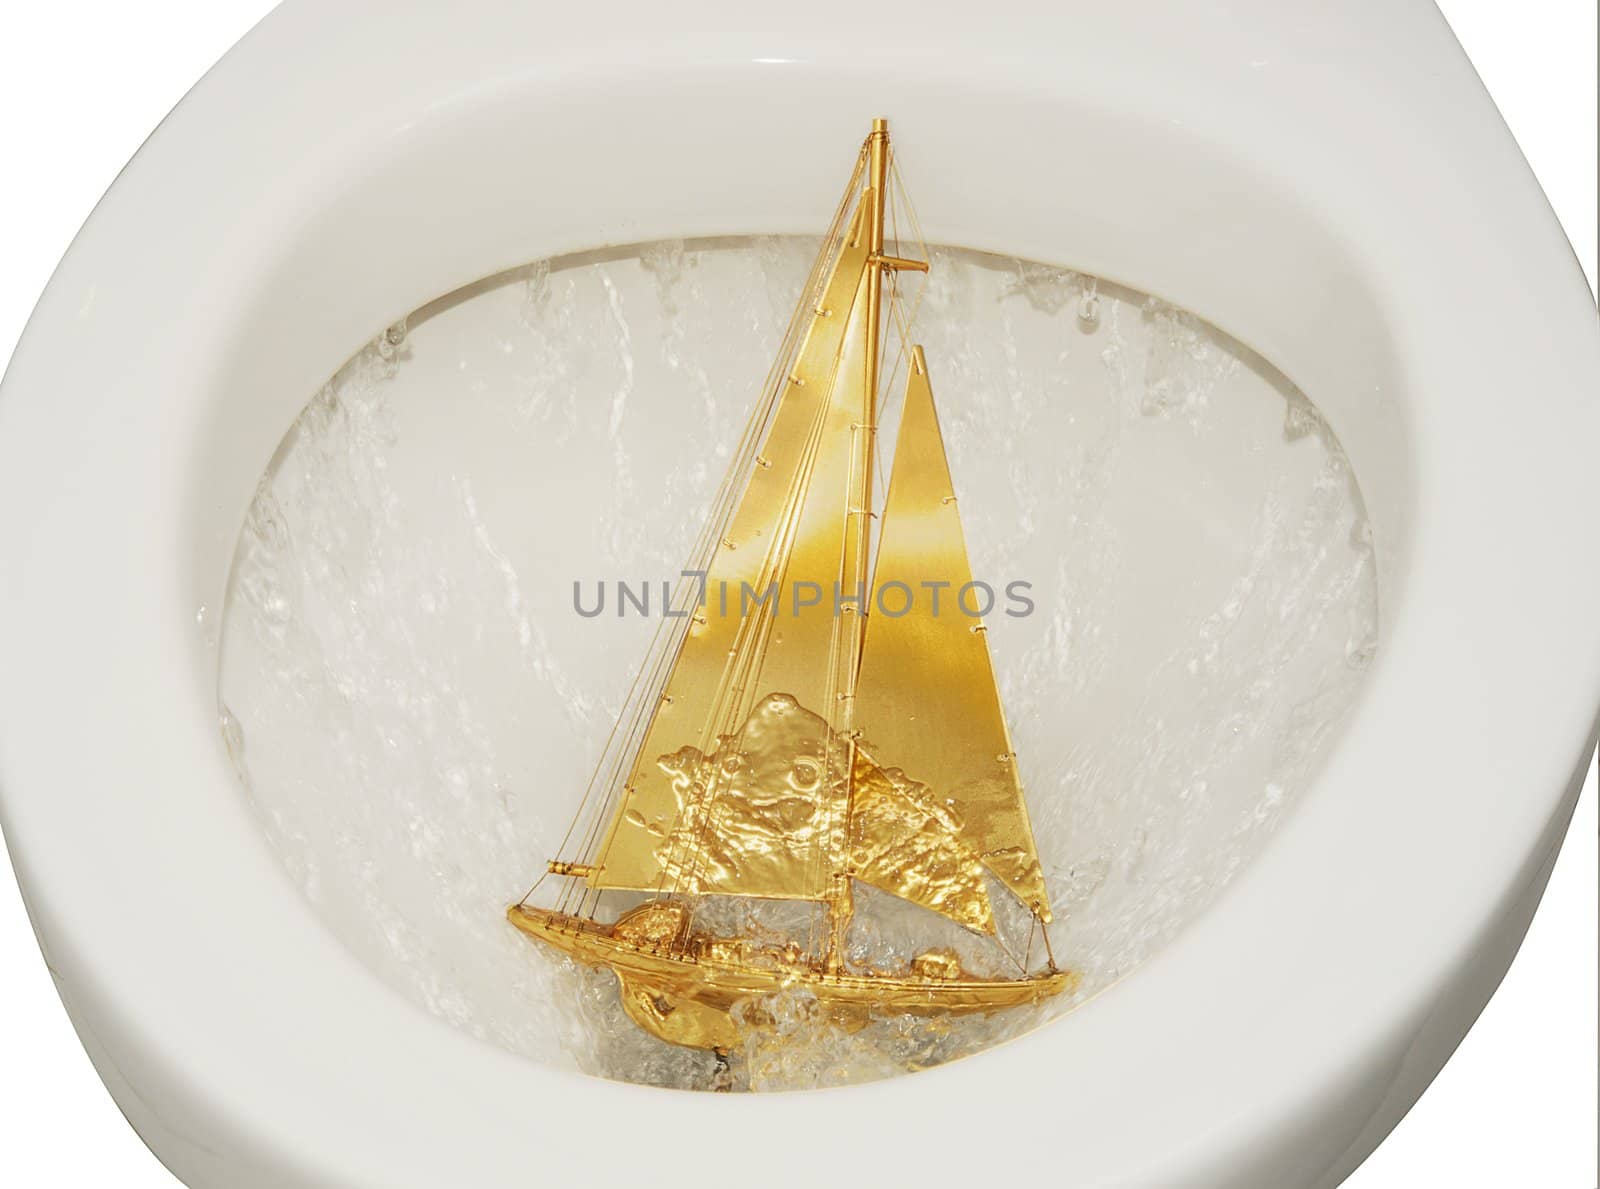 Yacht Sinks In Toilet. The Effects Of Financial Crisis.